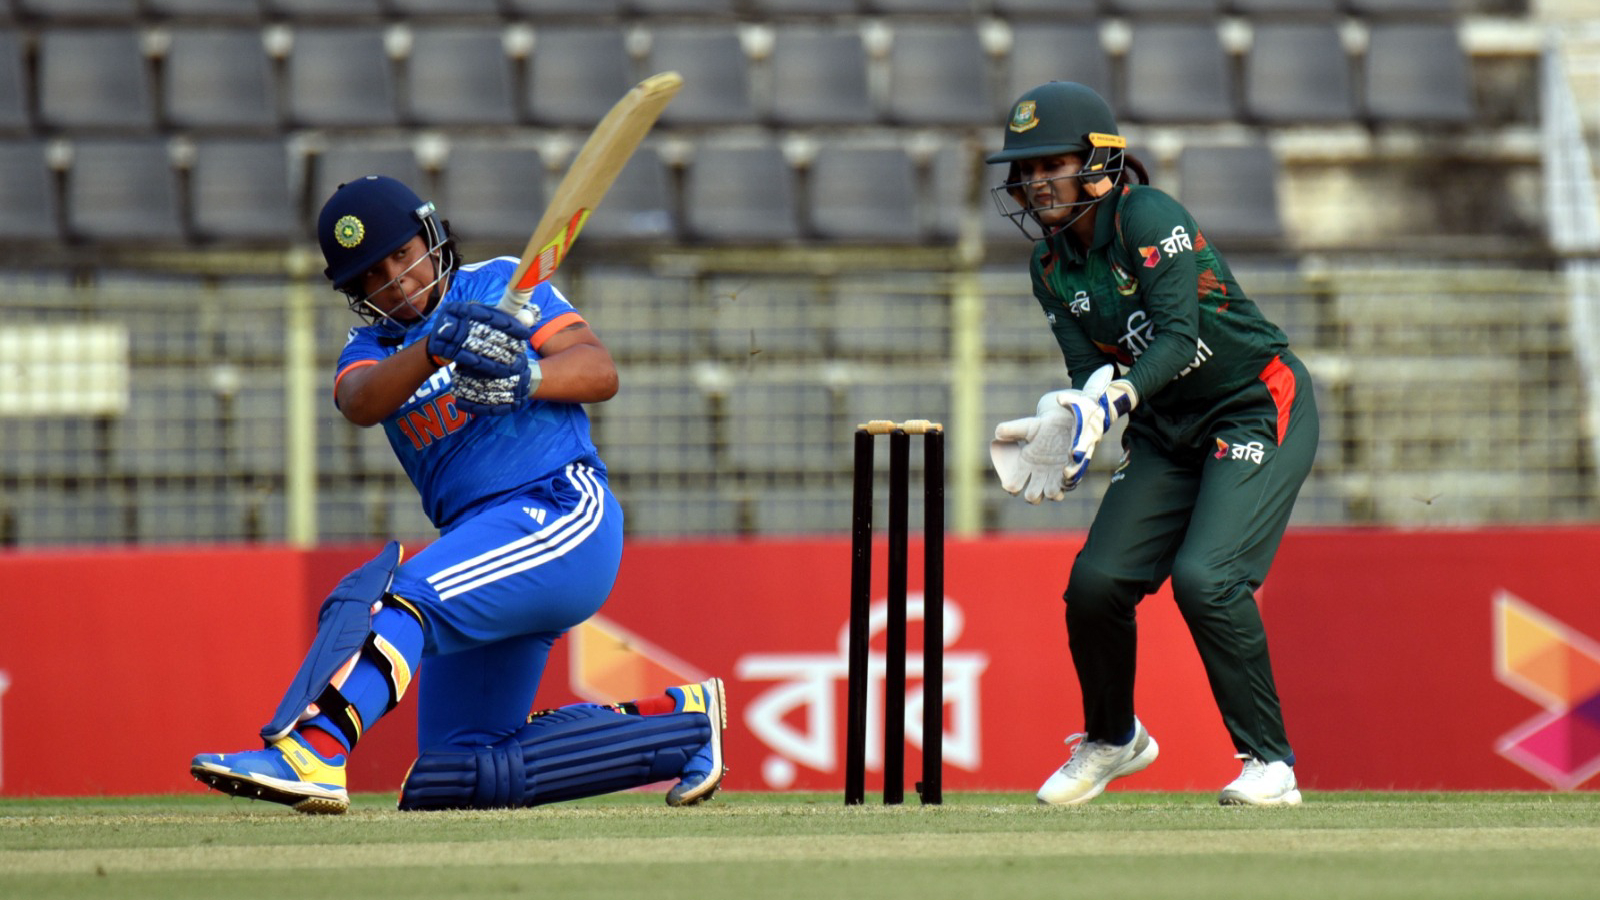 Renuka Singh stars with the ball, Harmanpreet top-scores as India beat Bangladesh easily in first T20I - The Indian Express